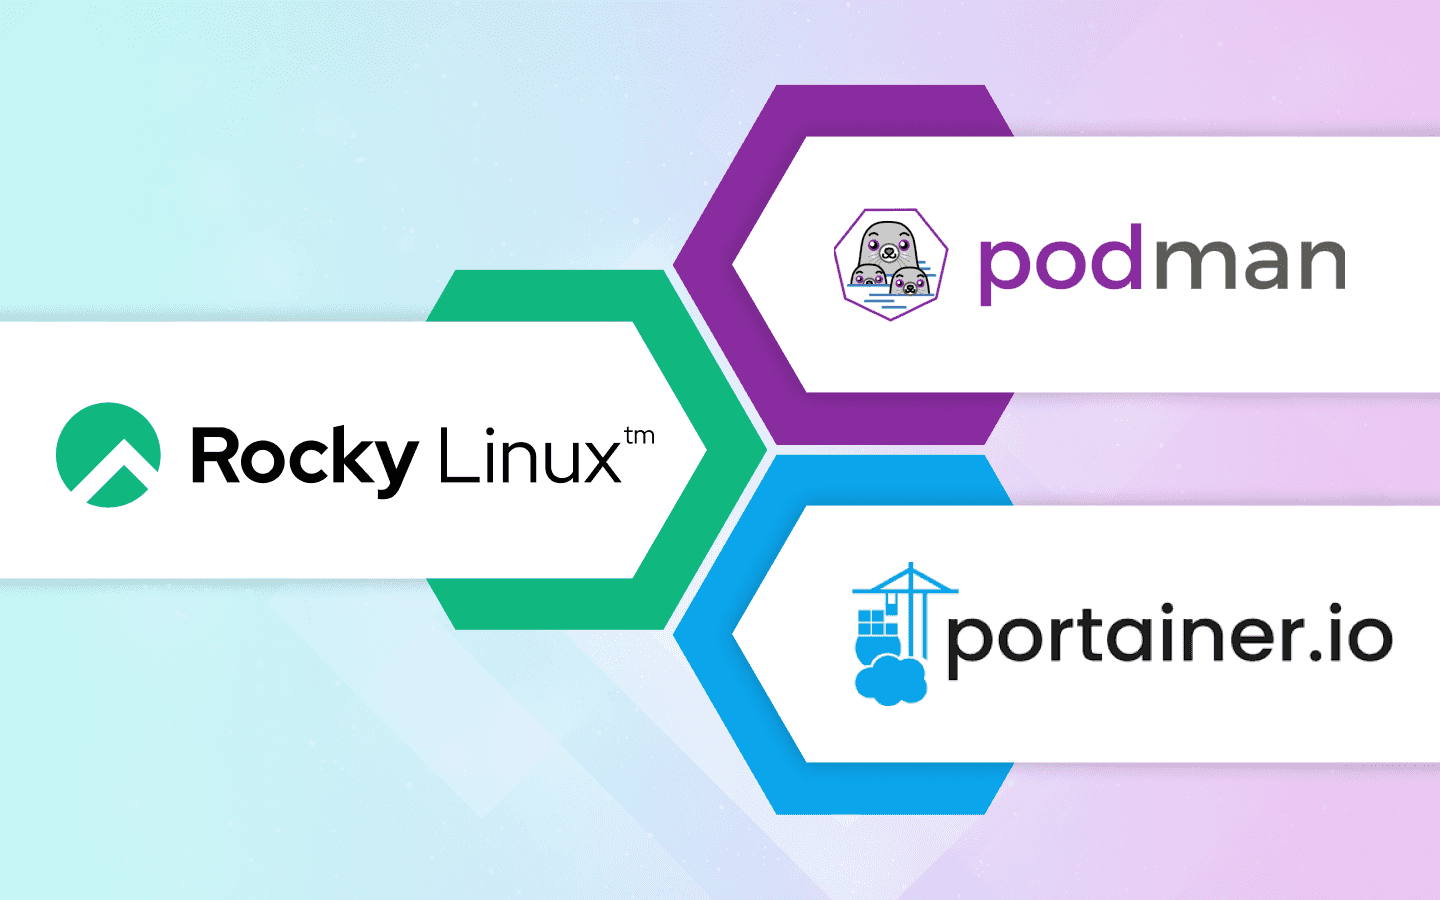 How to Deploy Portainer with Podman on Rocky Linux